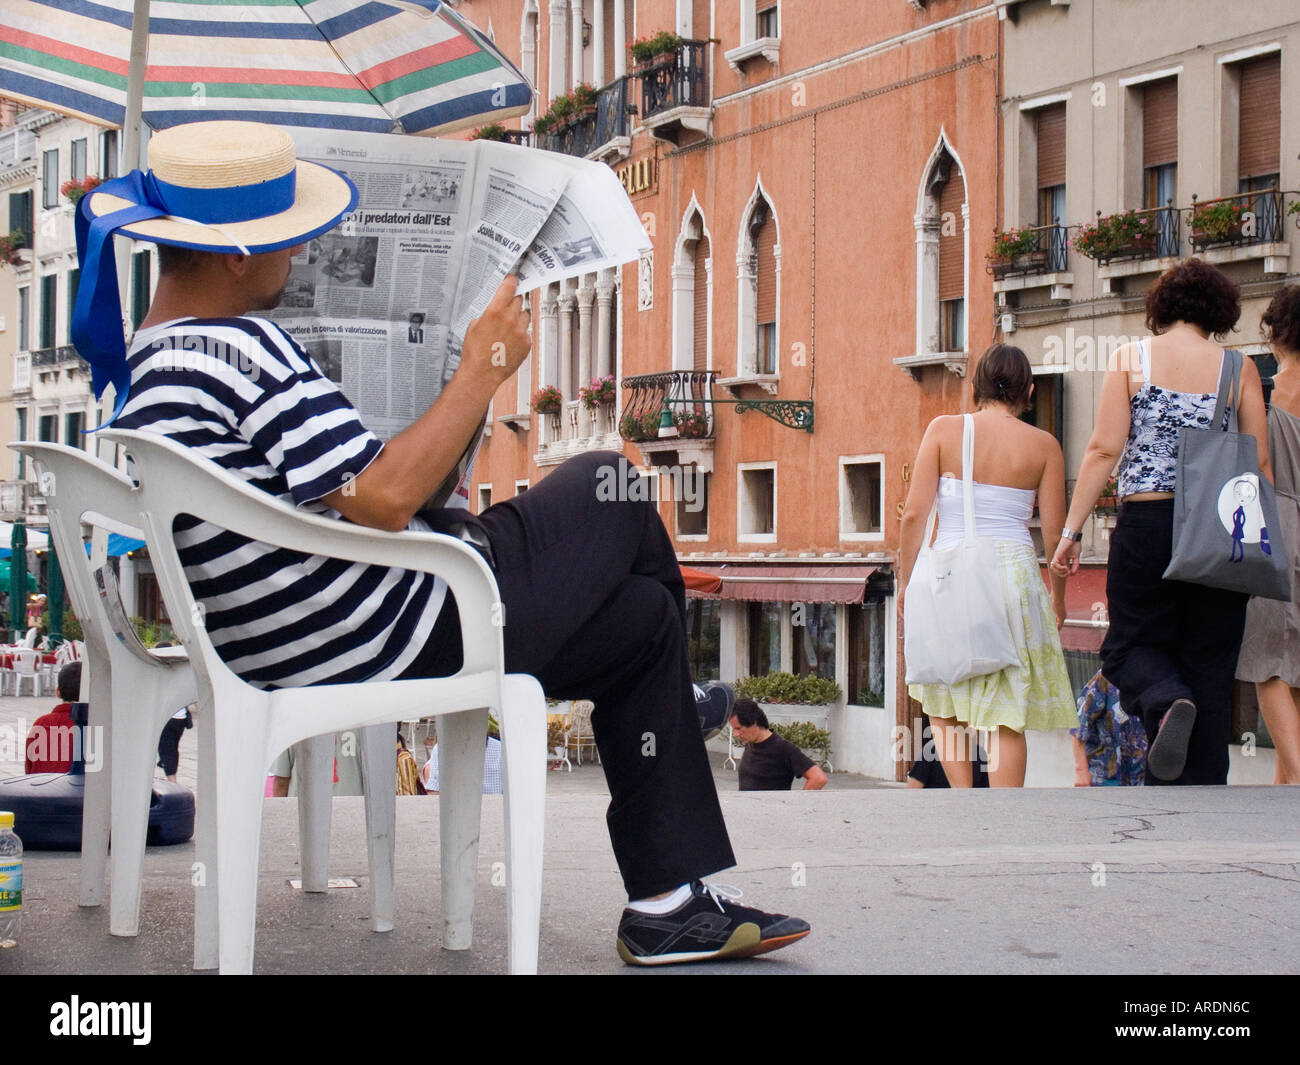 Gondolier wearing traditional straw hat and striped shirt sits reading newspaper while waiting for next customer Venice Italy Stock Photo